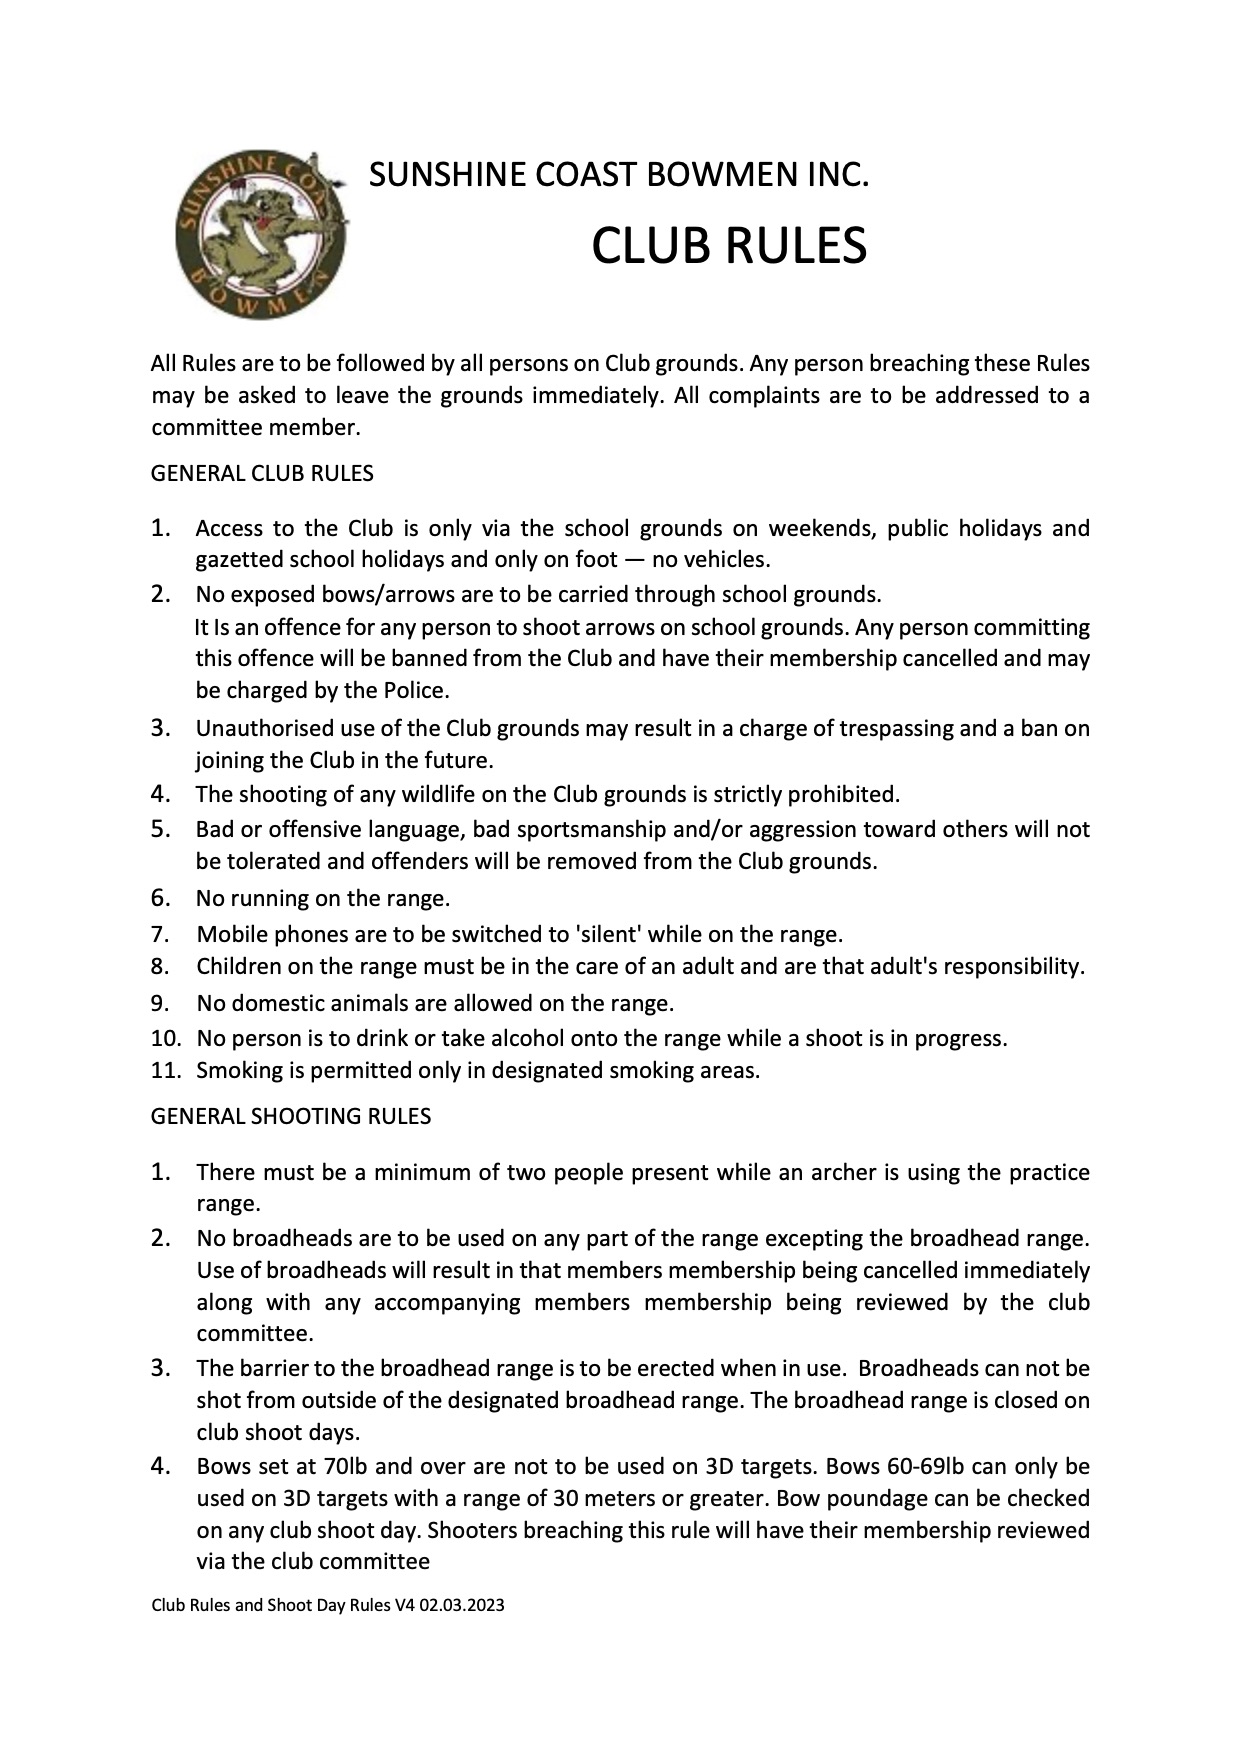 Club-Rules-and-shoot-Day-Rules_V4-02-03.23